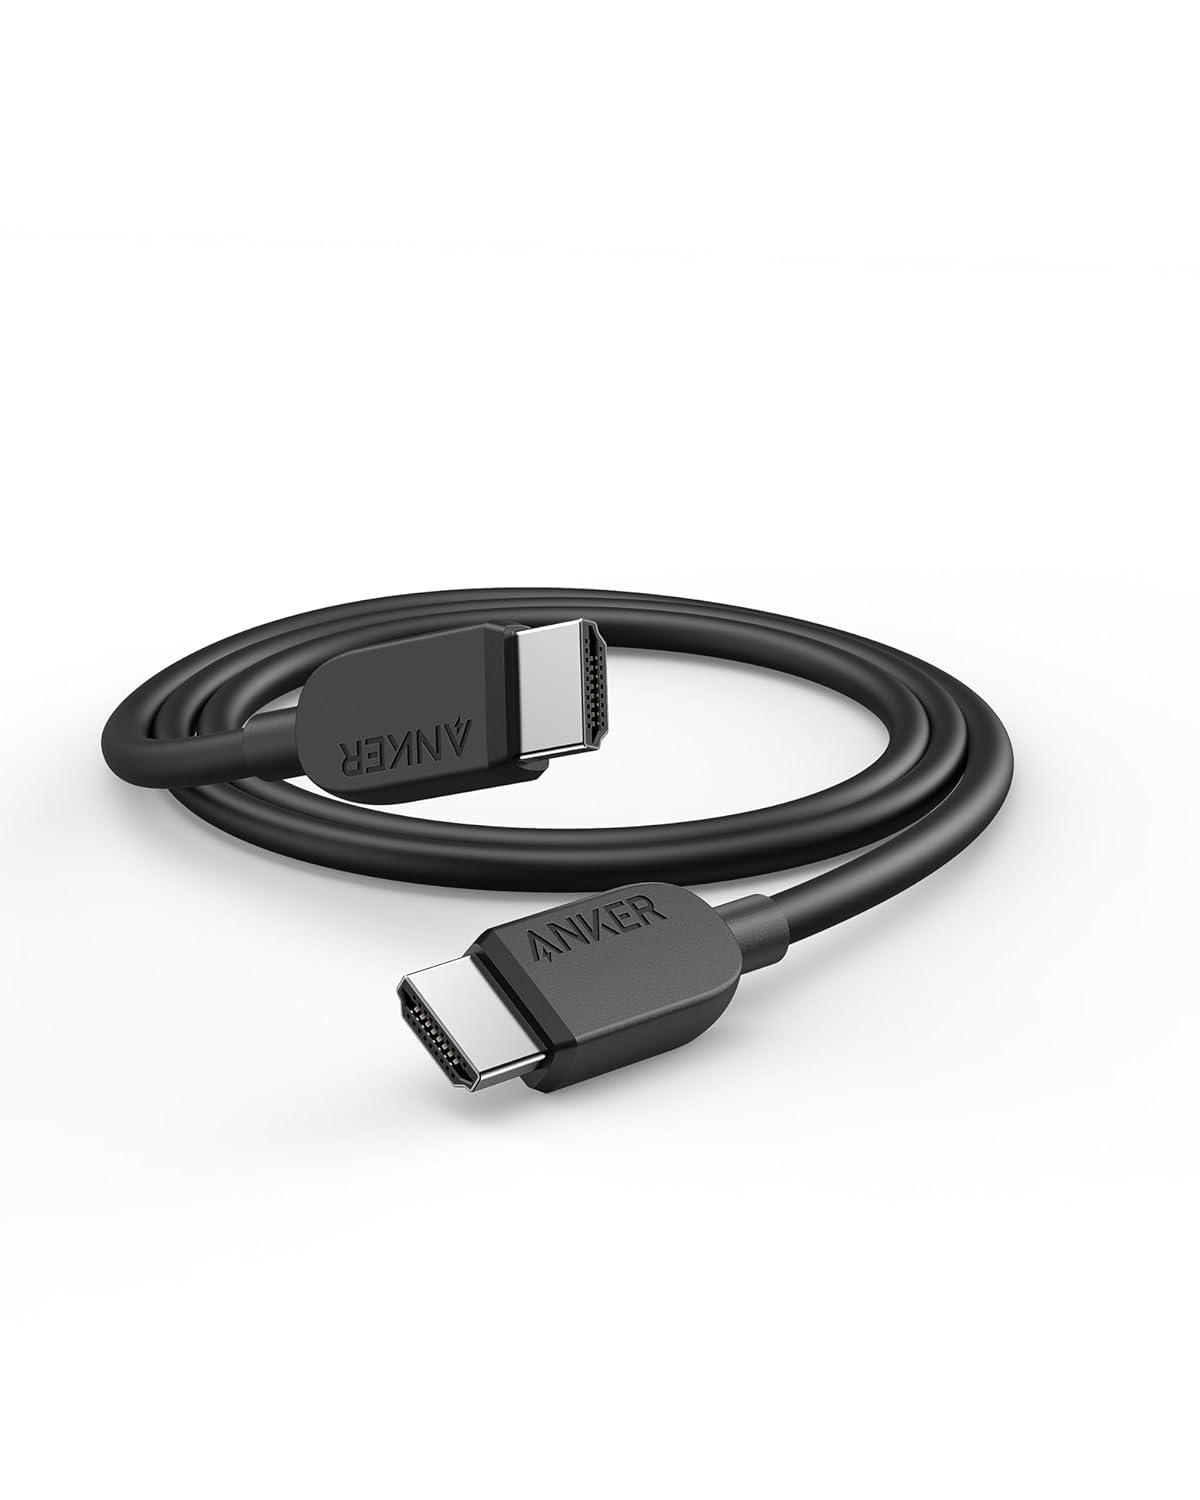 A8742H11 / Anker HDMI Cable Black (6 ft, 8K) -194644168544 Cable / Black / HDMI Cable Black (6 ft, 8K)